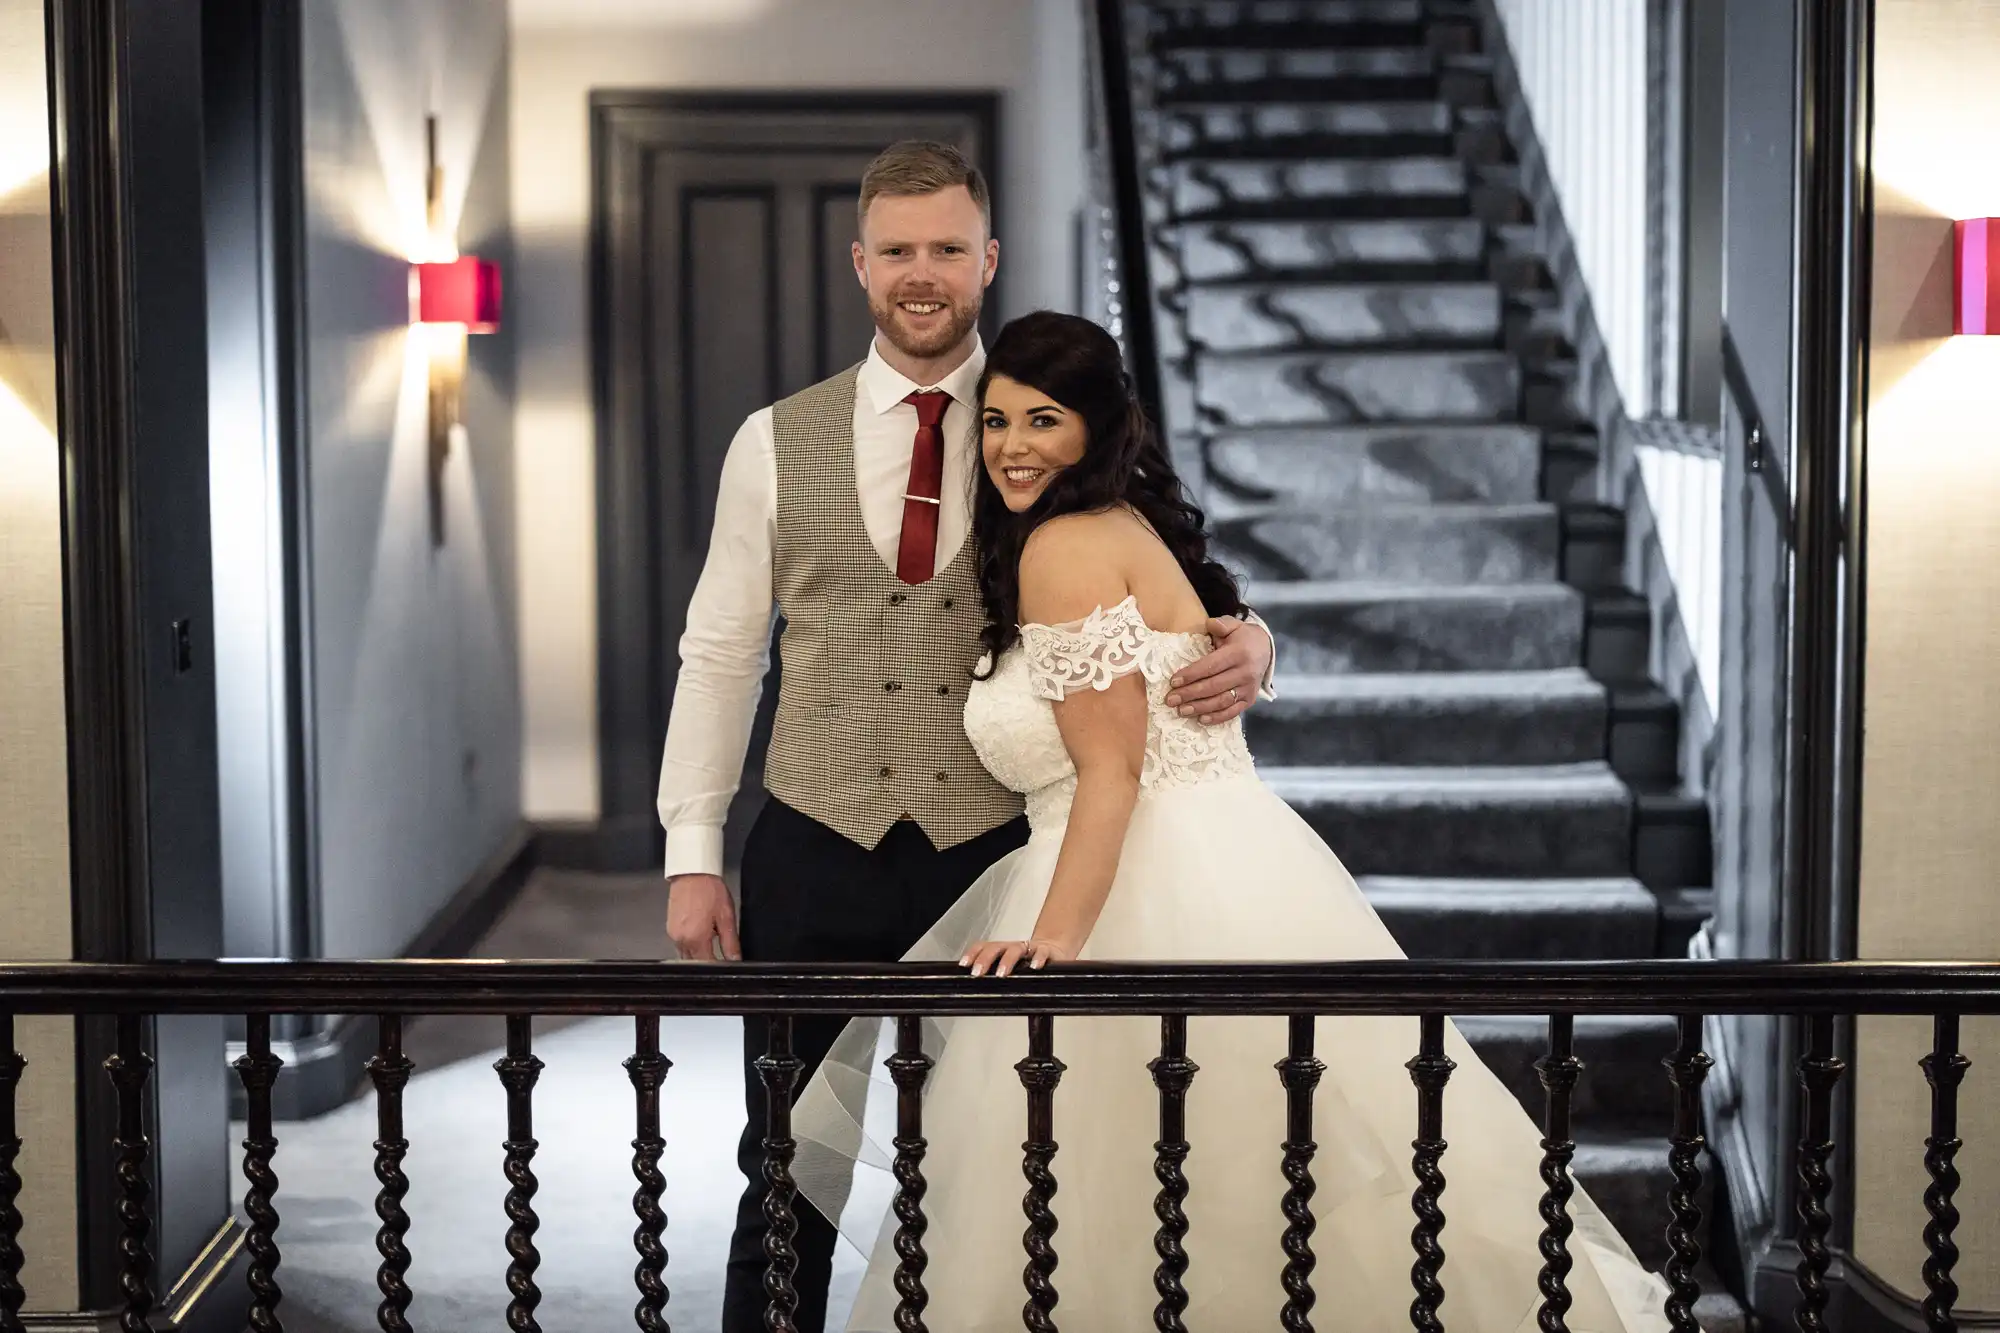 A bride in a white gown and groom in a vest and tie pose together, smiling, on a staircase landing inside a building.